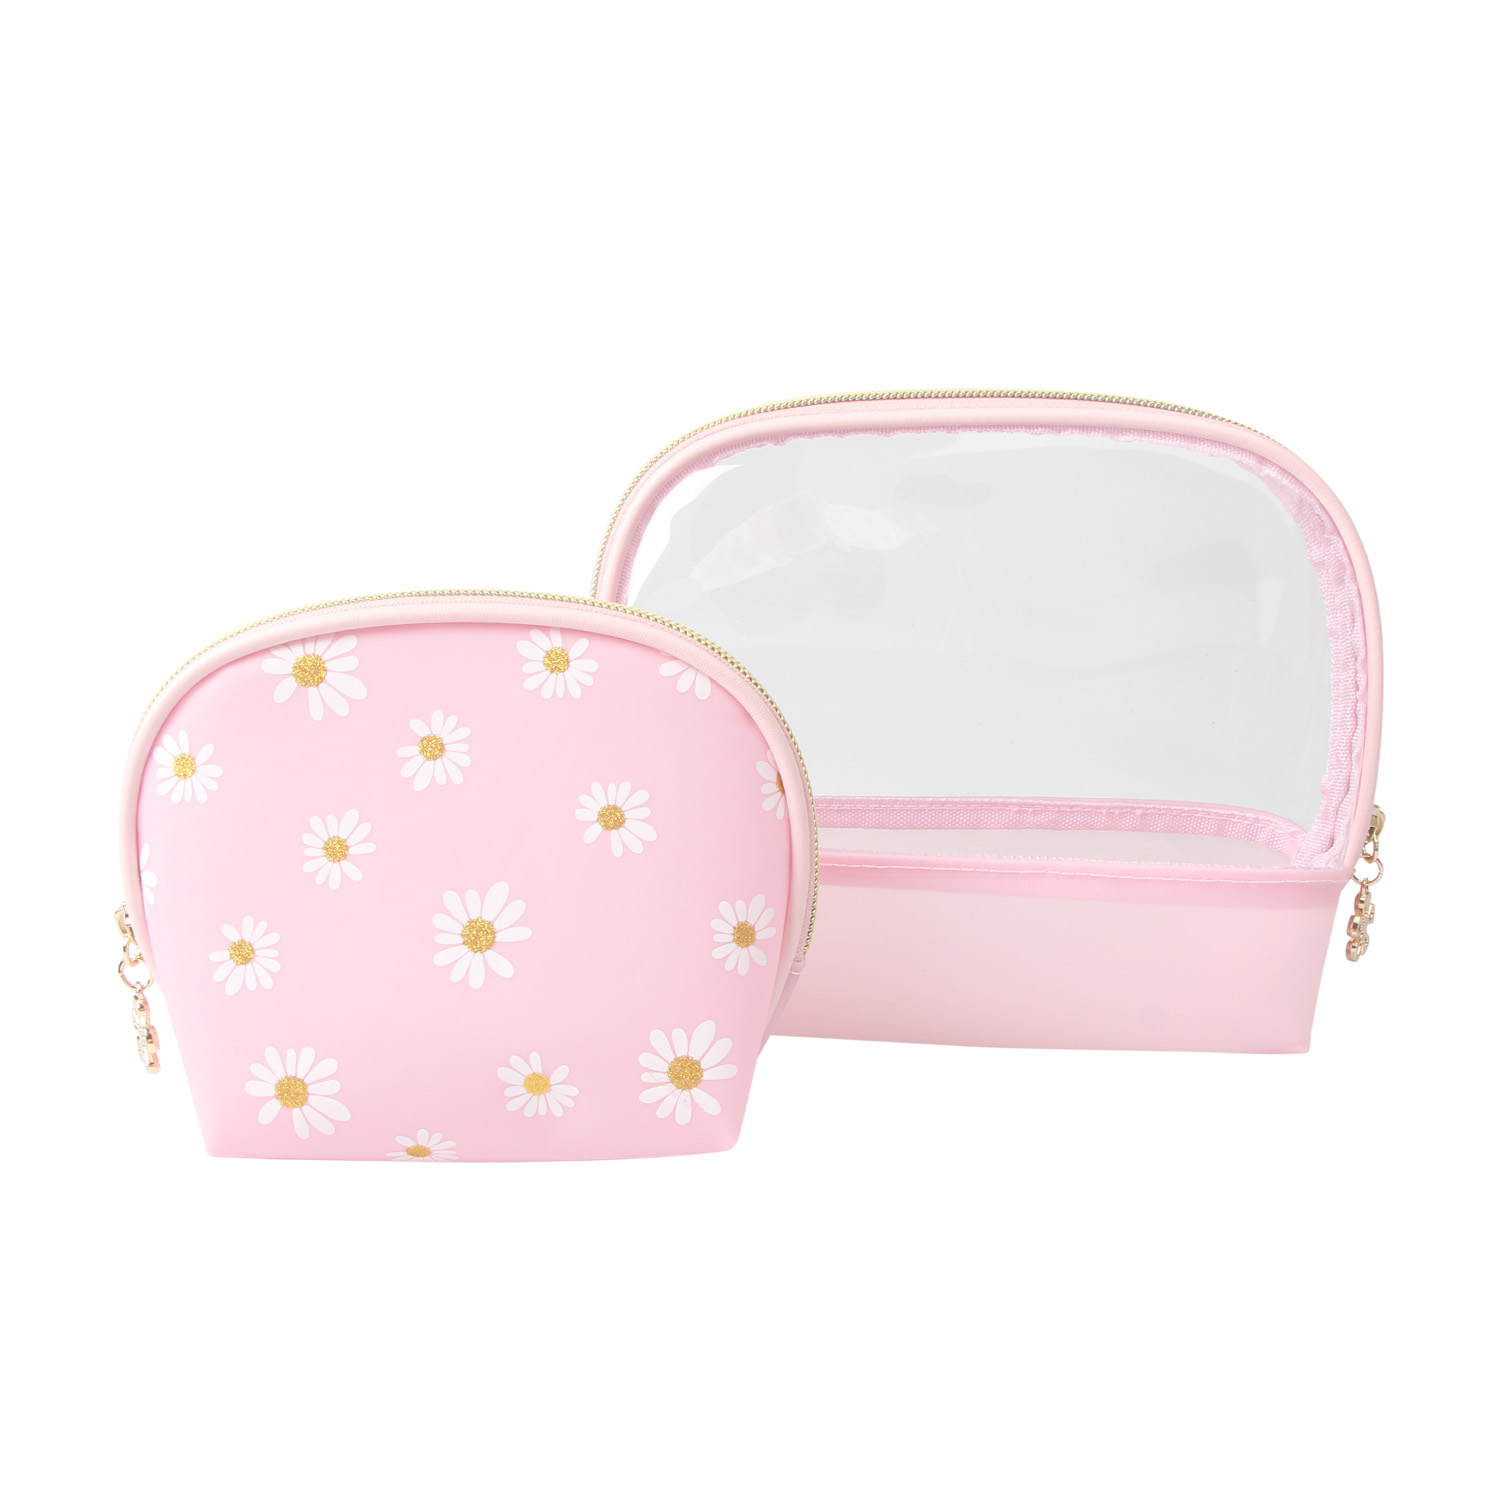 Gift Set for Women and Girls: Portable Cosmetic Polyester Pouch and Travel Toiletry Bag